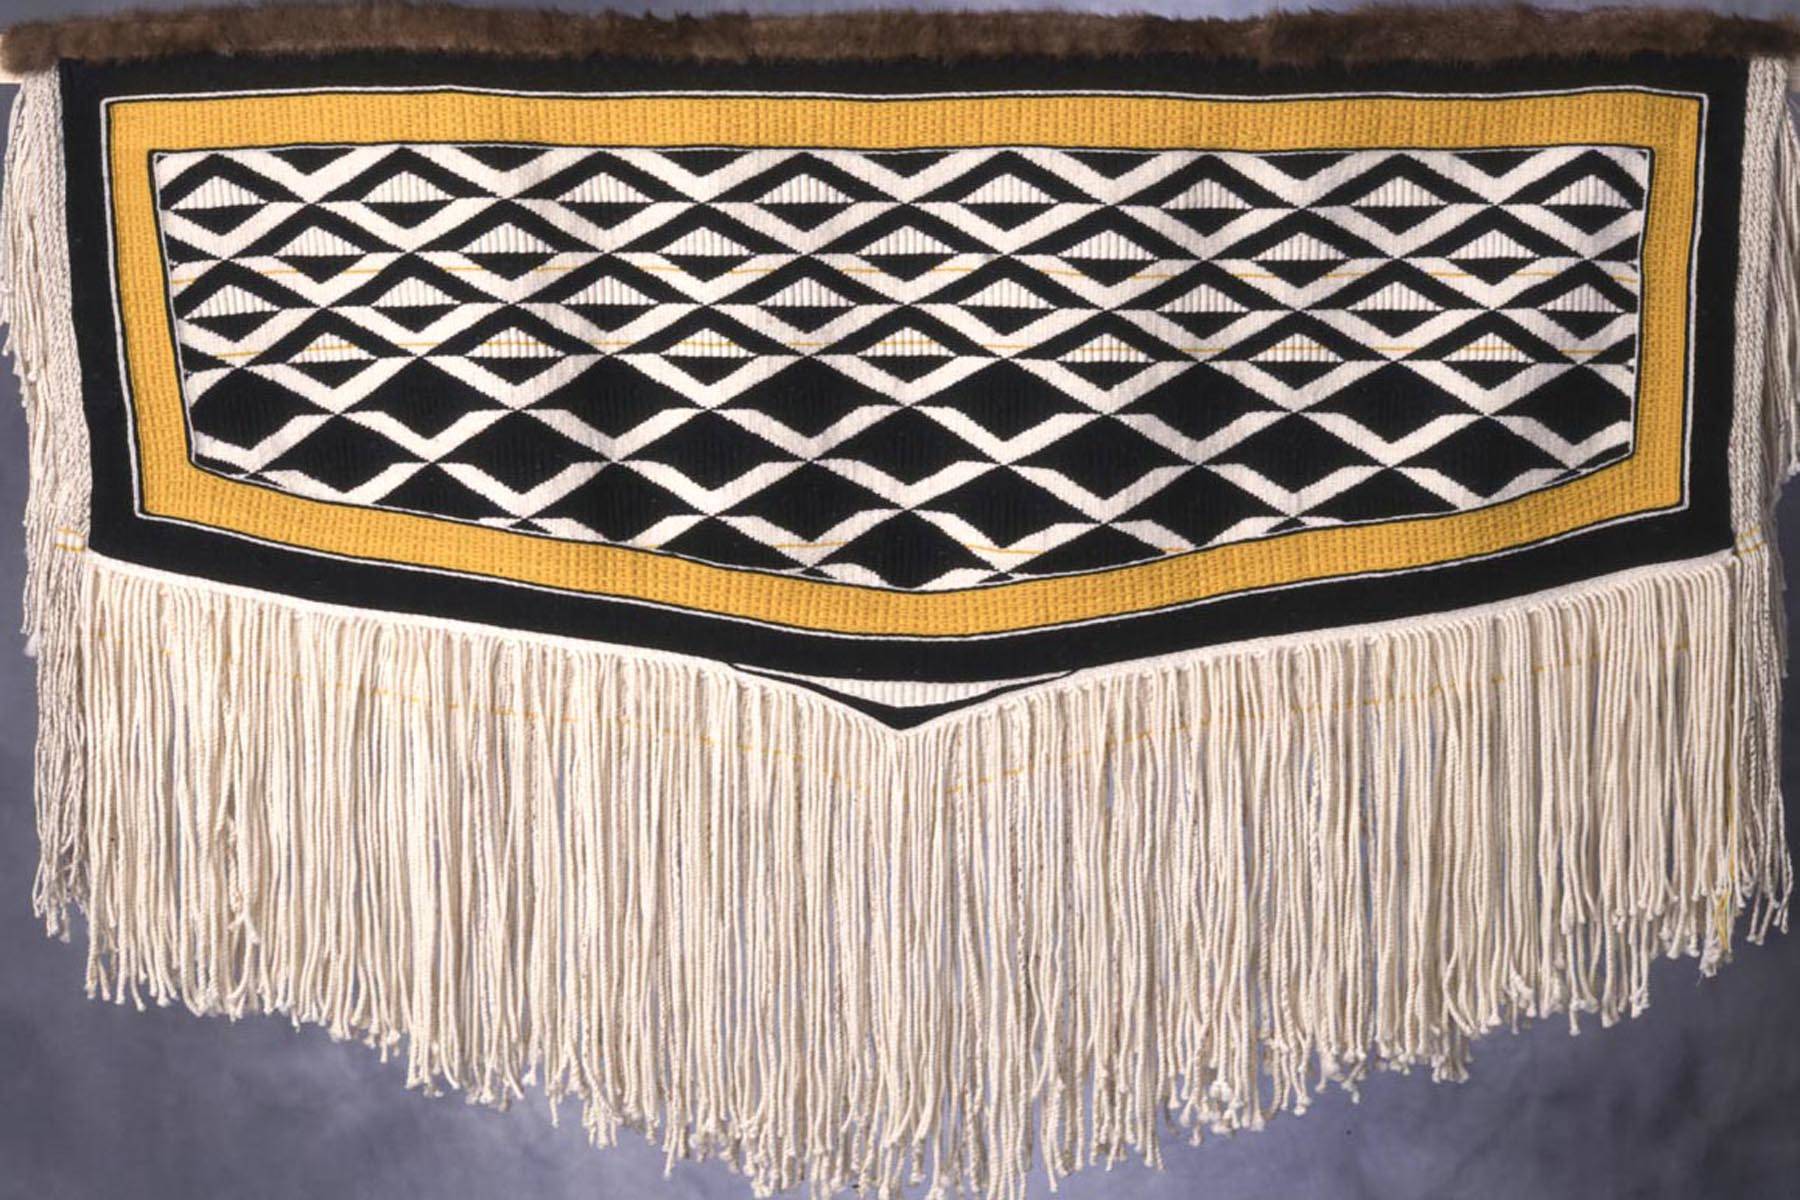 Courtesy photo | Sealaska Heritage Institute                                This original Ravenstail-style design, inspired by traditional designs in use for hundreds of years in Tlingit, Haida, and Tsimshian cultures, was created by Clarissa Rizal, a master weaver, in 1996. (